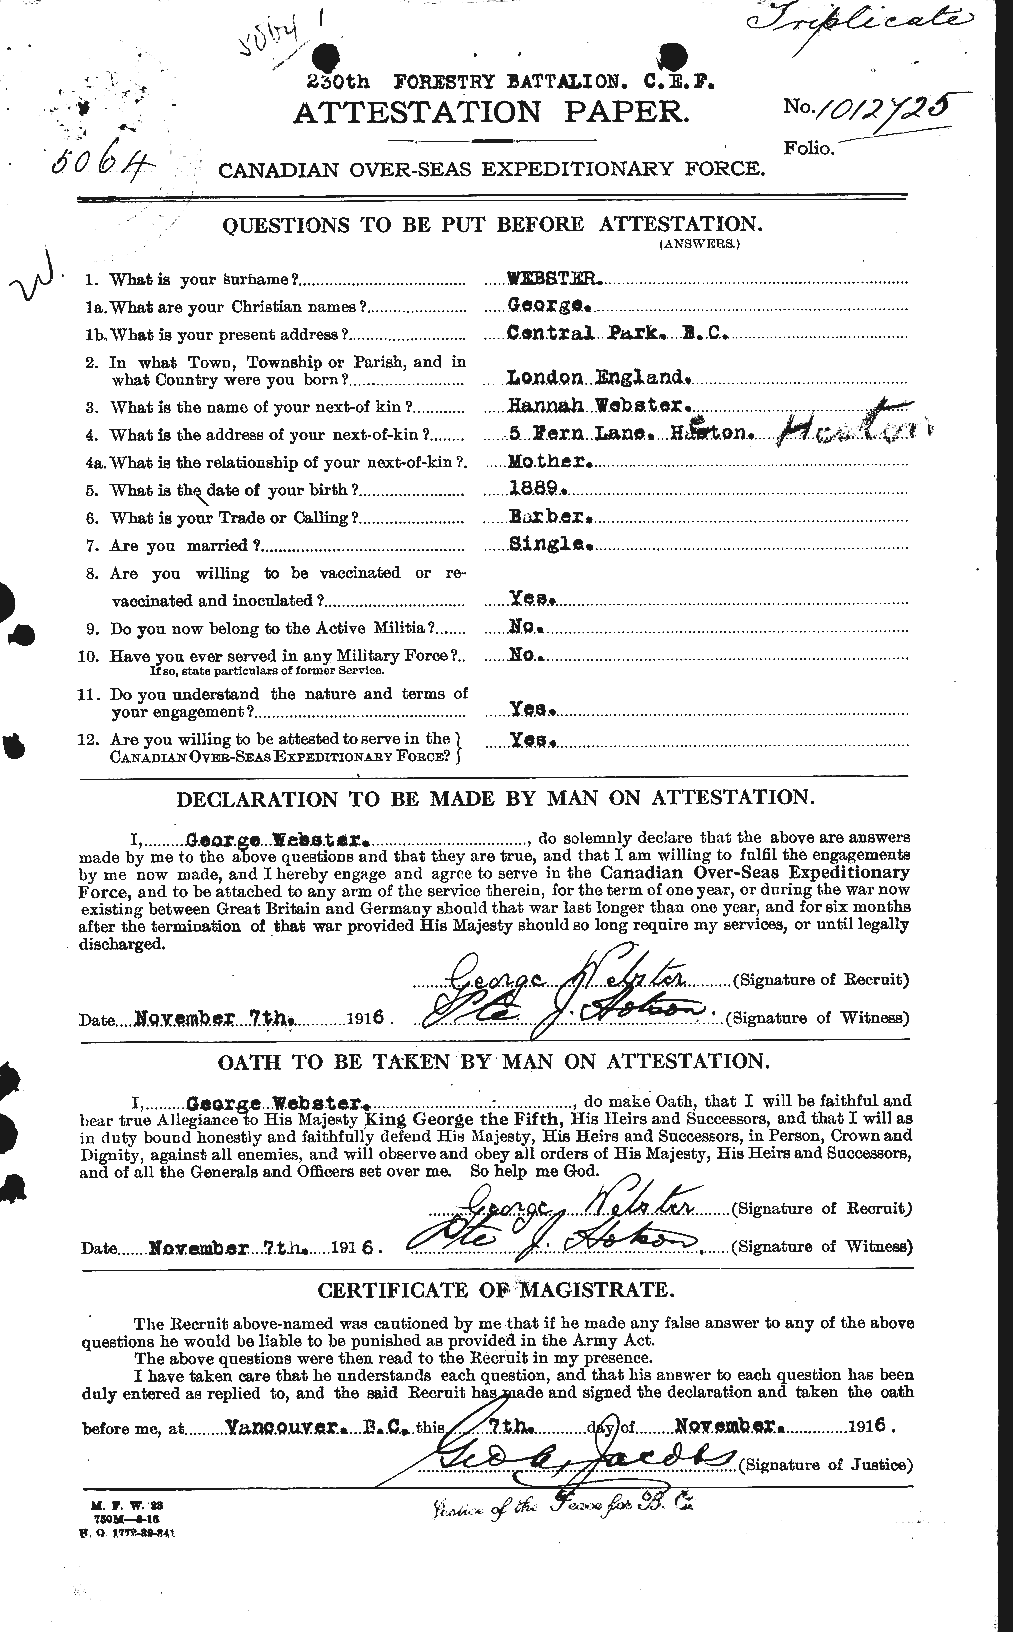 Personnel Records of the First World War - CEF 670374a